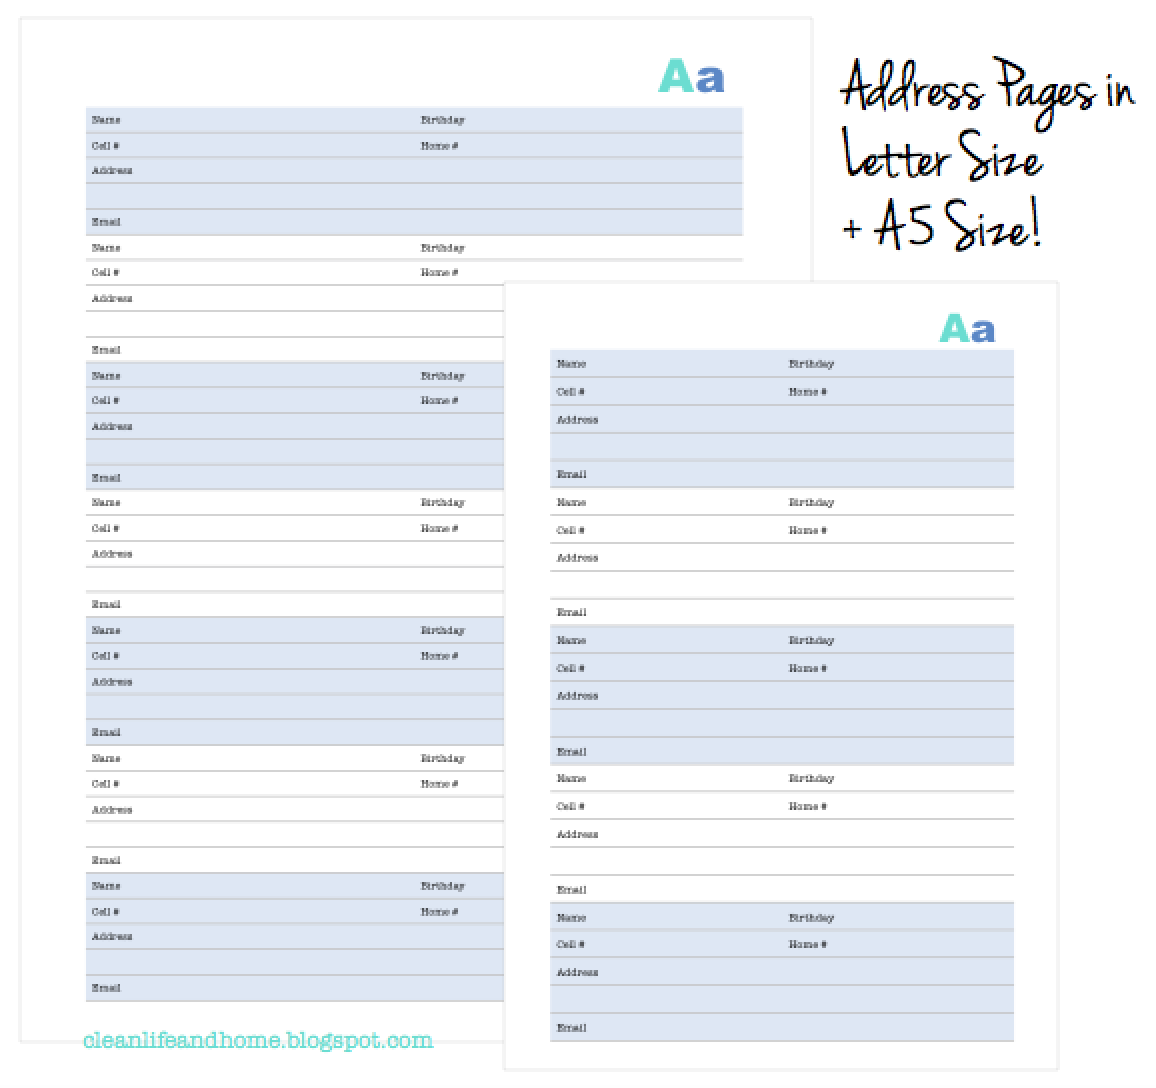 clean-life-and-home-new-printable-address-book-with-tabs-lots-of-dots